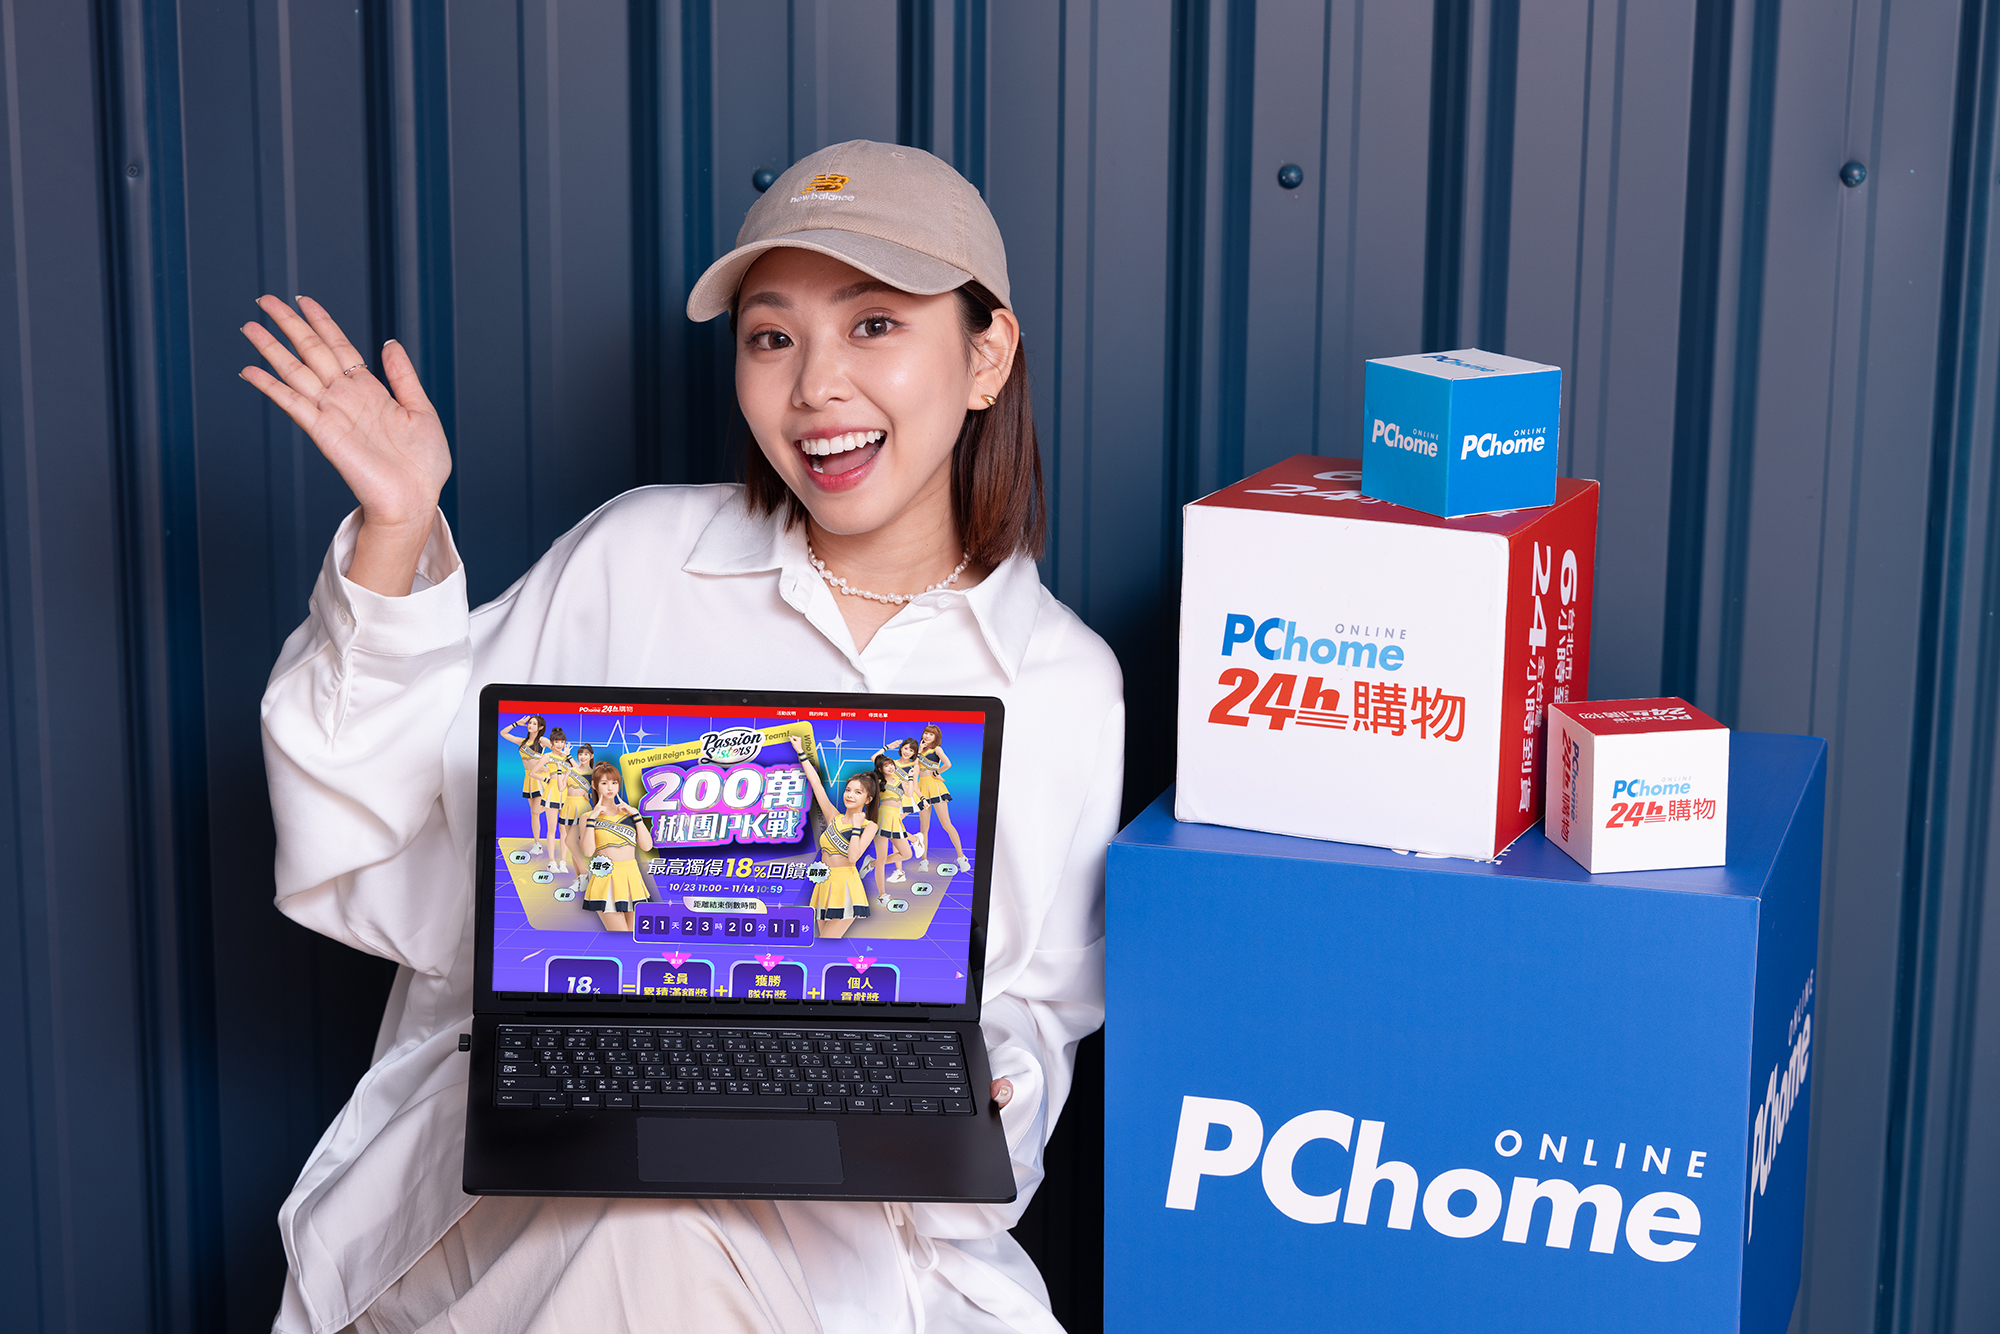 PChome 24h Shopping Launches the Double 11 Shopping Festival on Oct 23, Offers Shopping Rewards Worth 10 Million Dollars, and Calls on Members to Get a First-hand Purchase